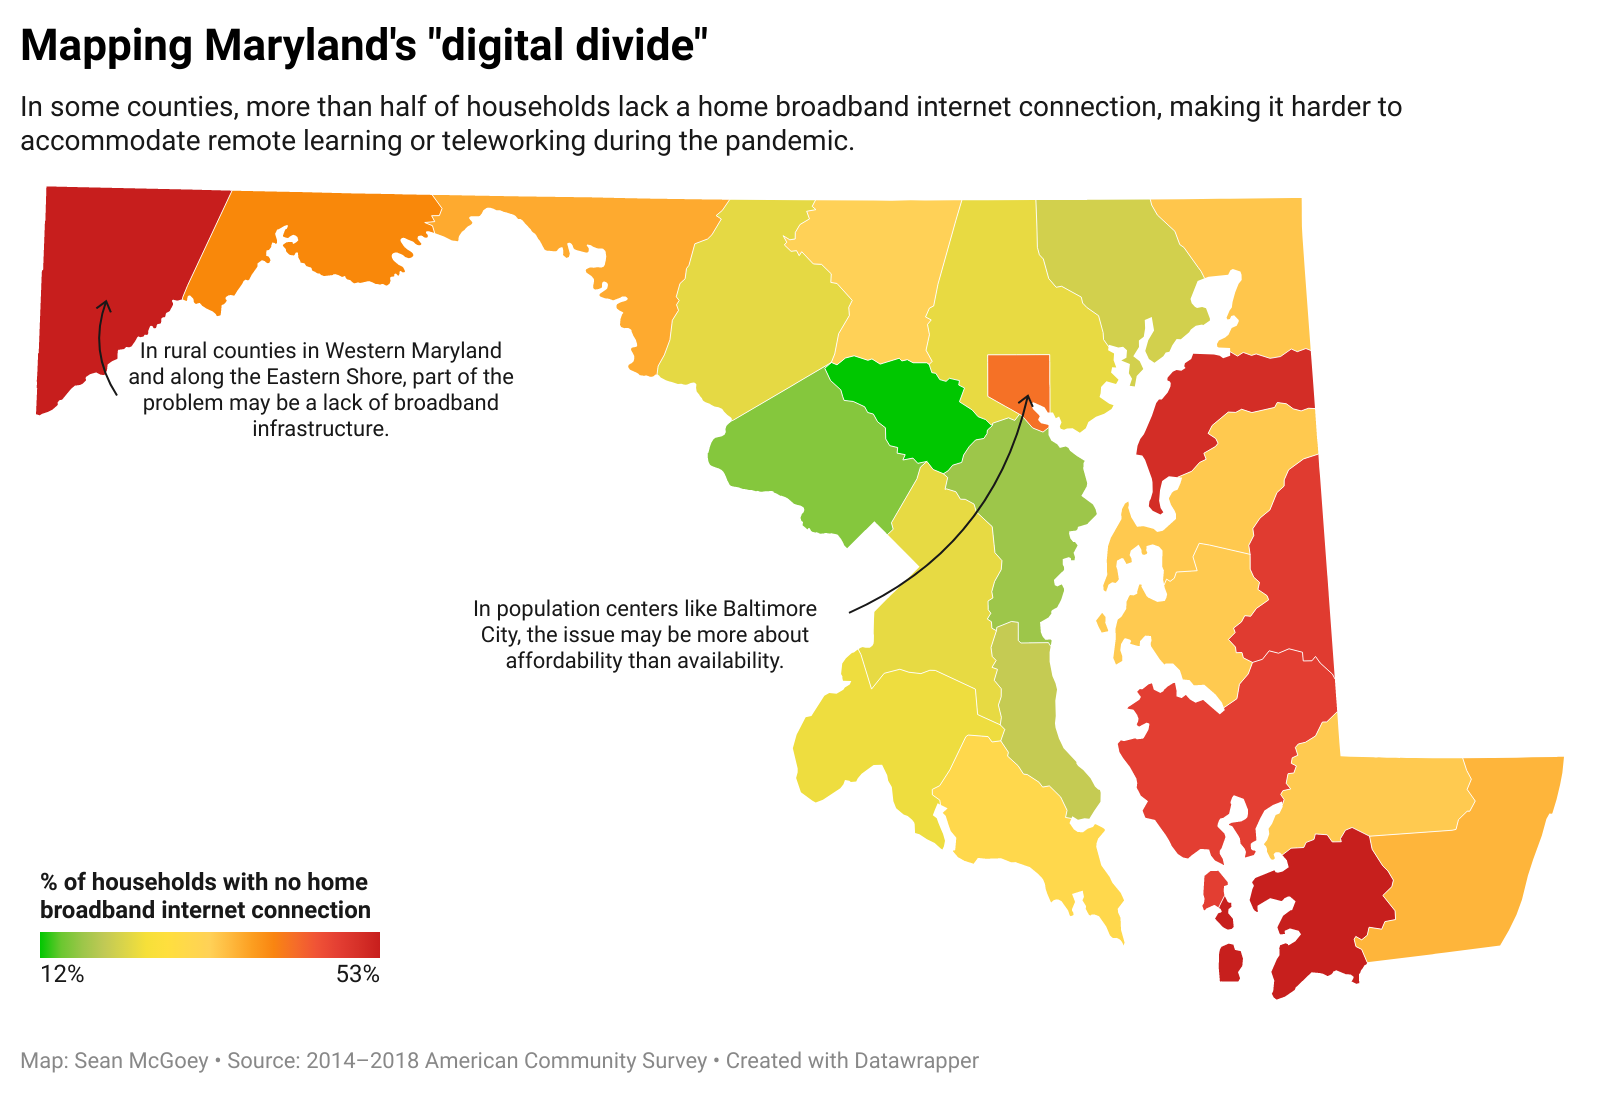 In some Maryland counties, more than half of households lack a home broadband internet connection, making it harder to accommodate remote learning or teleworking during the pandemic.